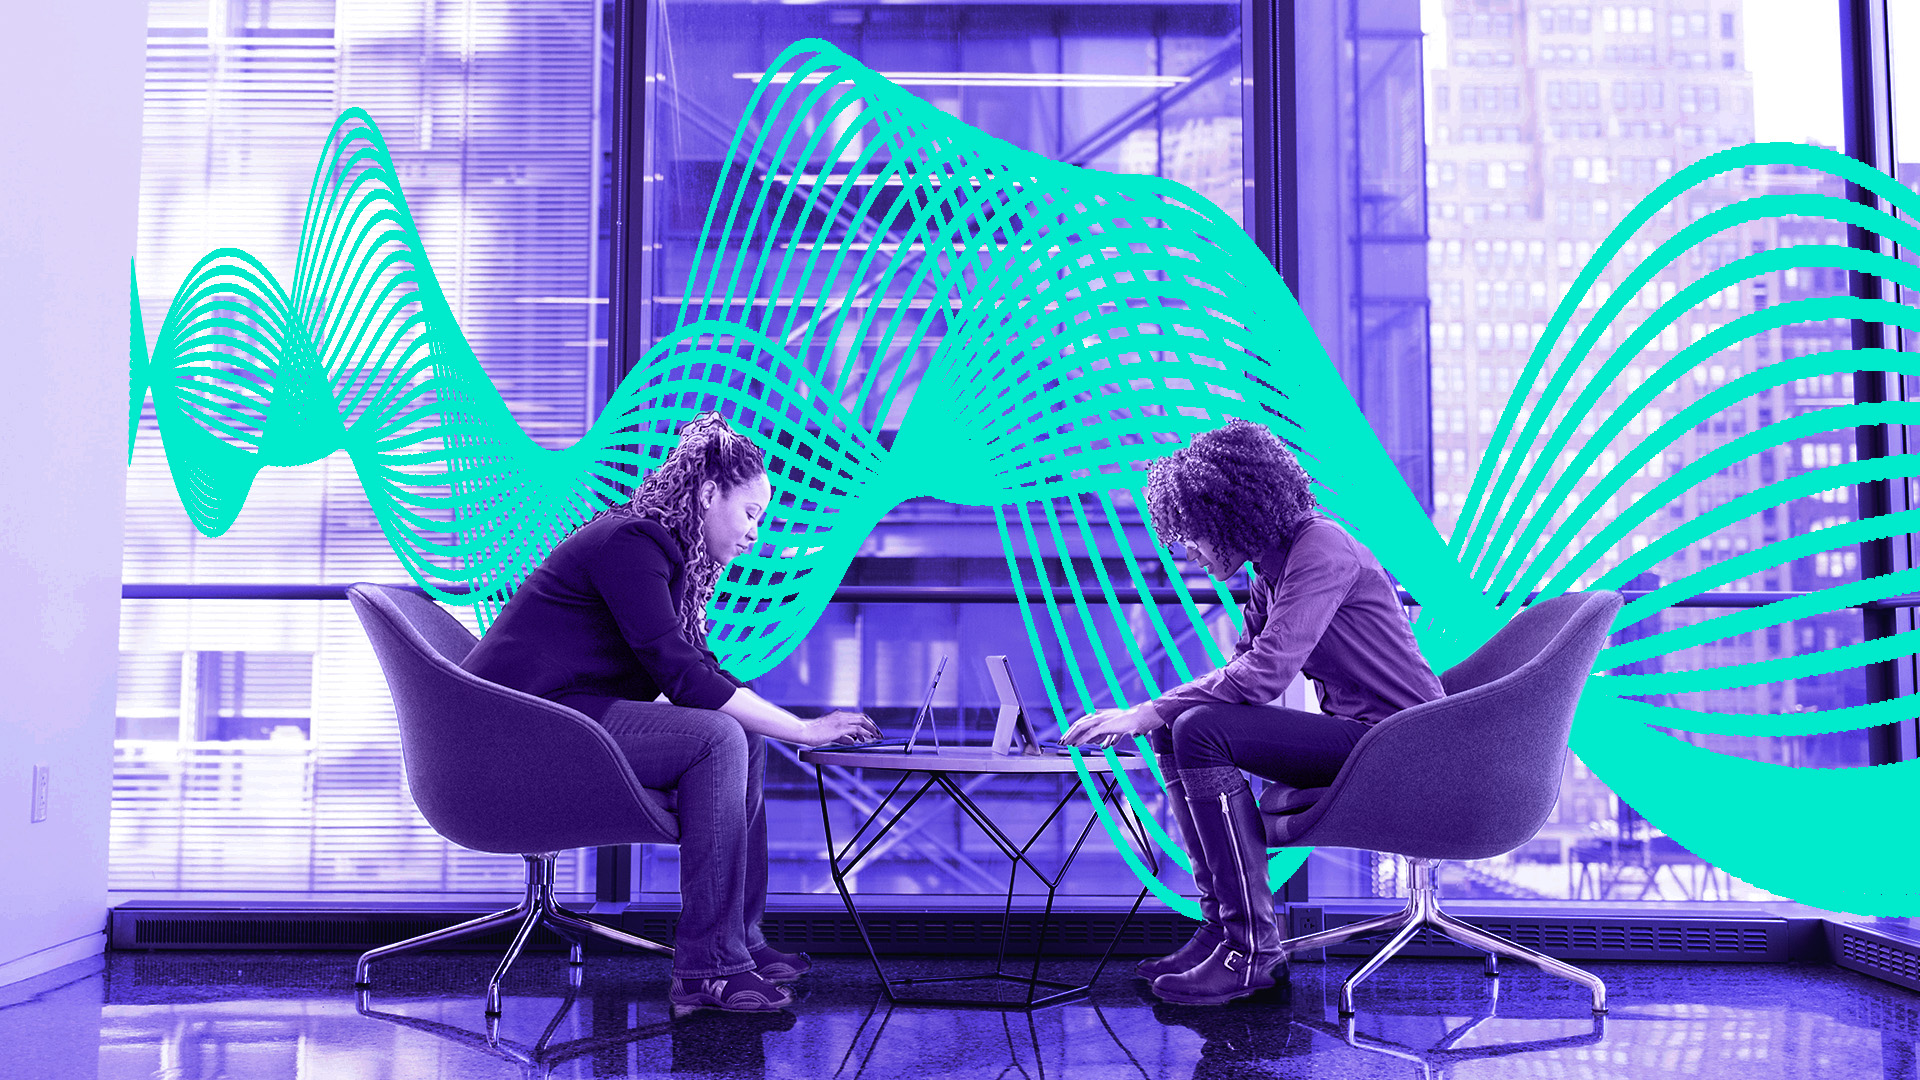 Two women sit opposite each other in chairs surrounded by glass exterior with audio wave sweeping through image